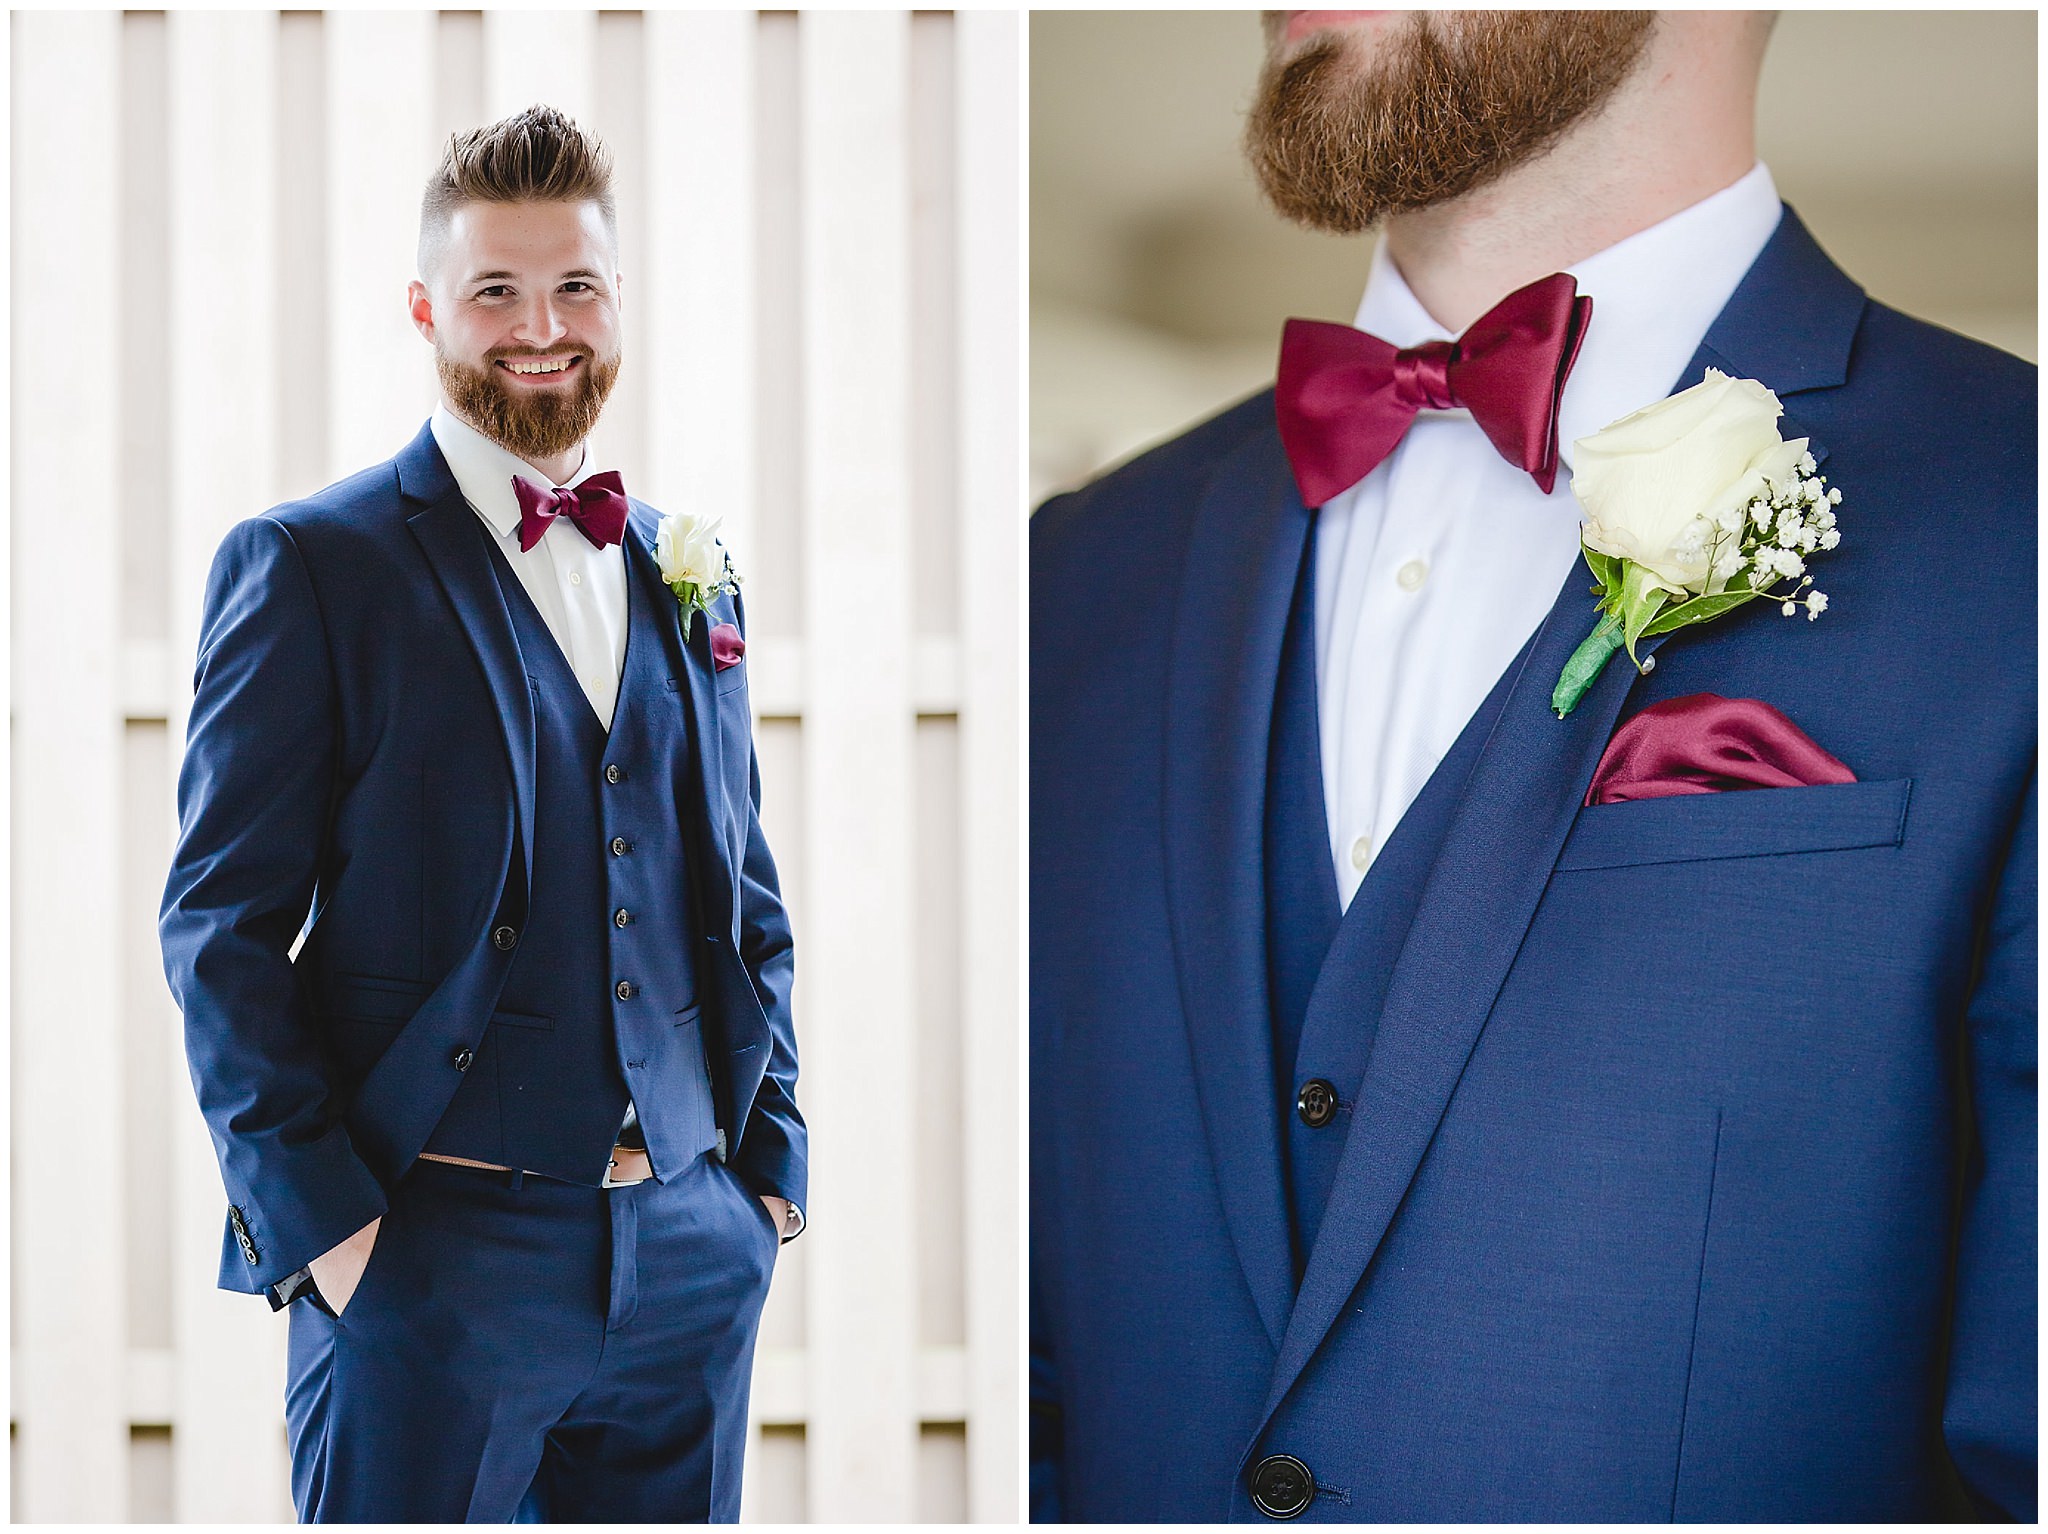 Groom portrait and boutonniere at the Chadwick